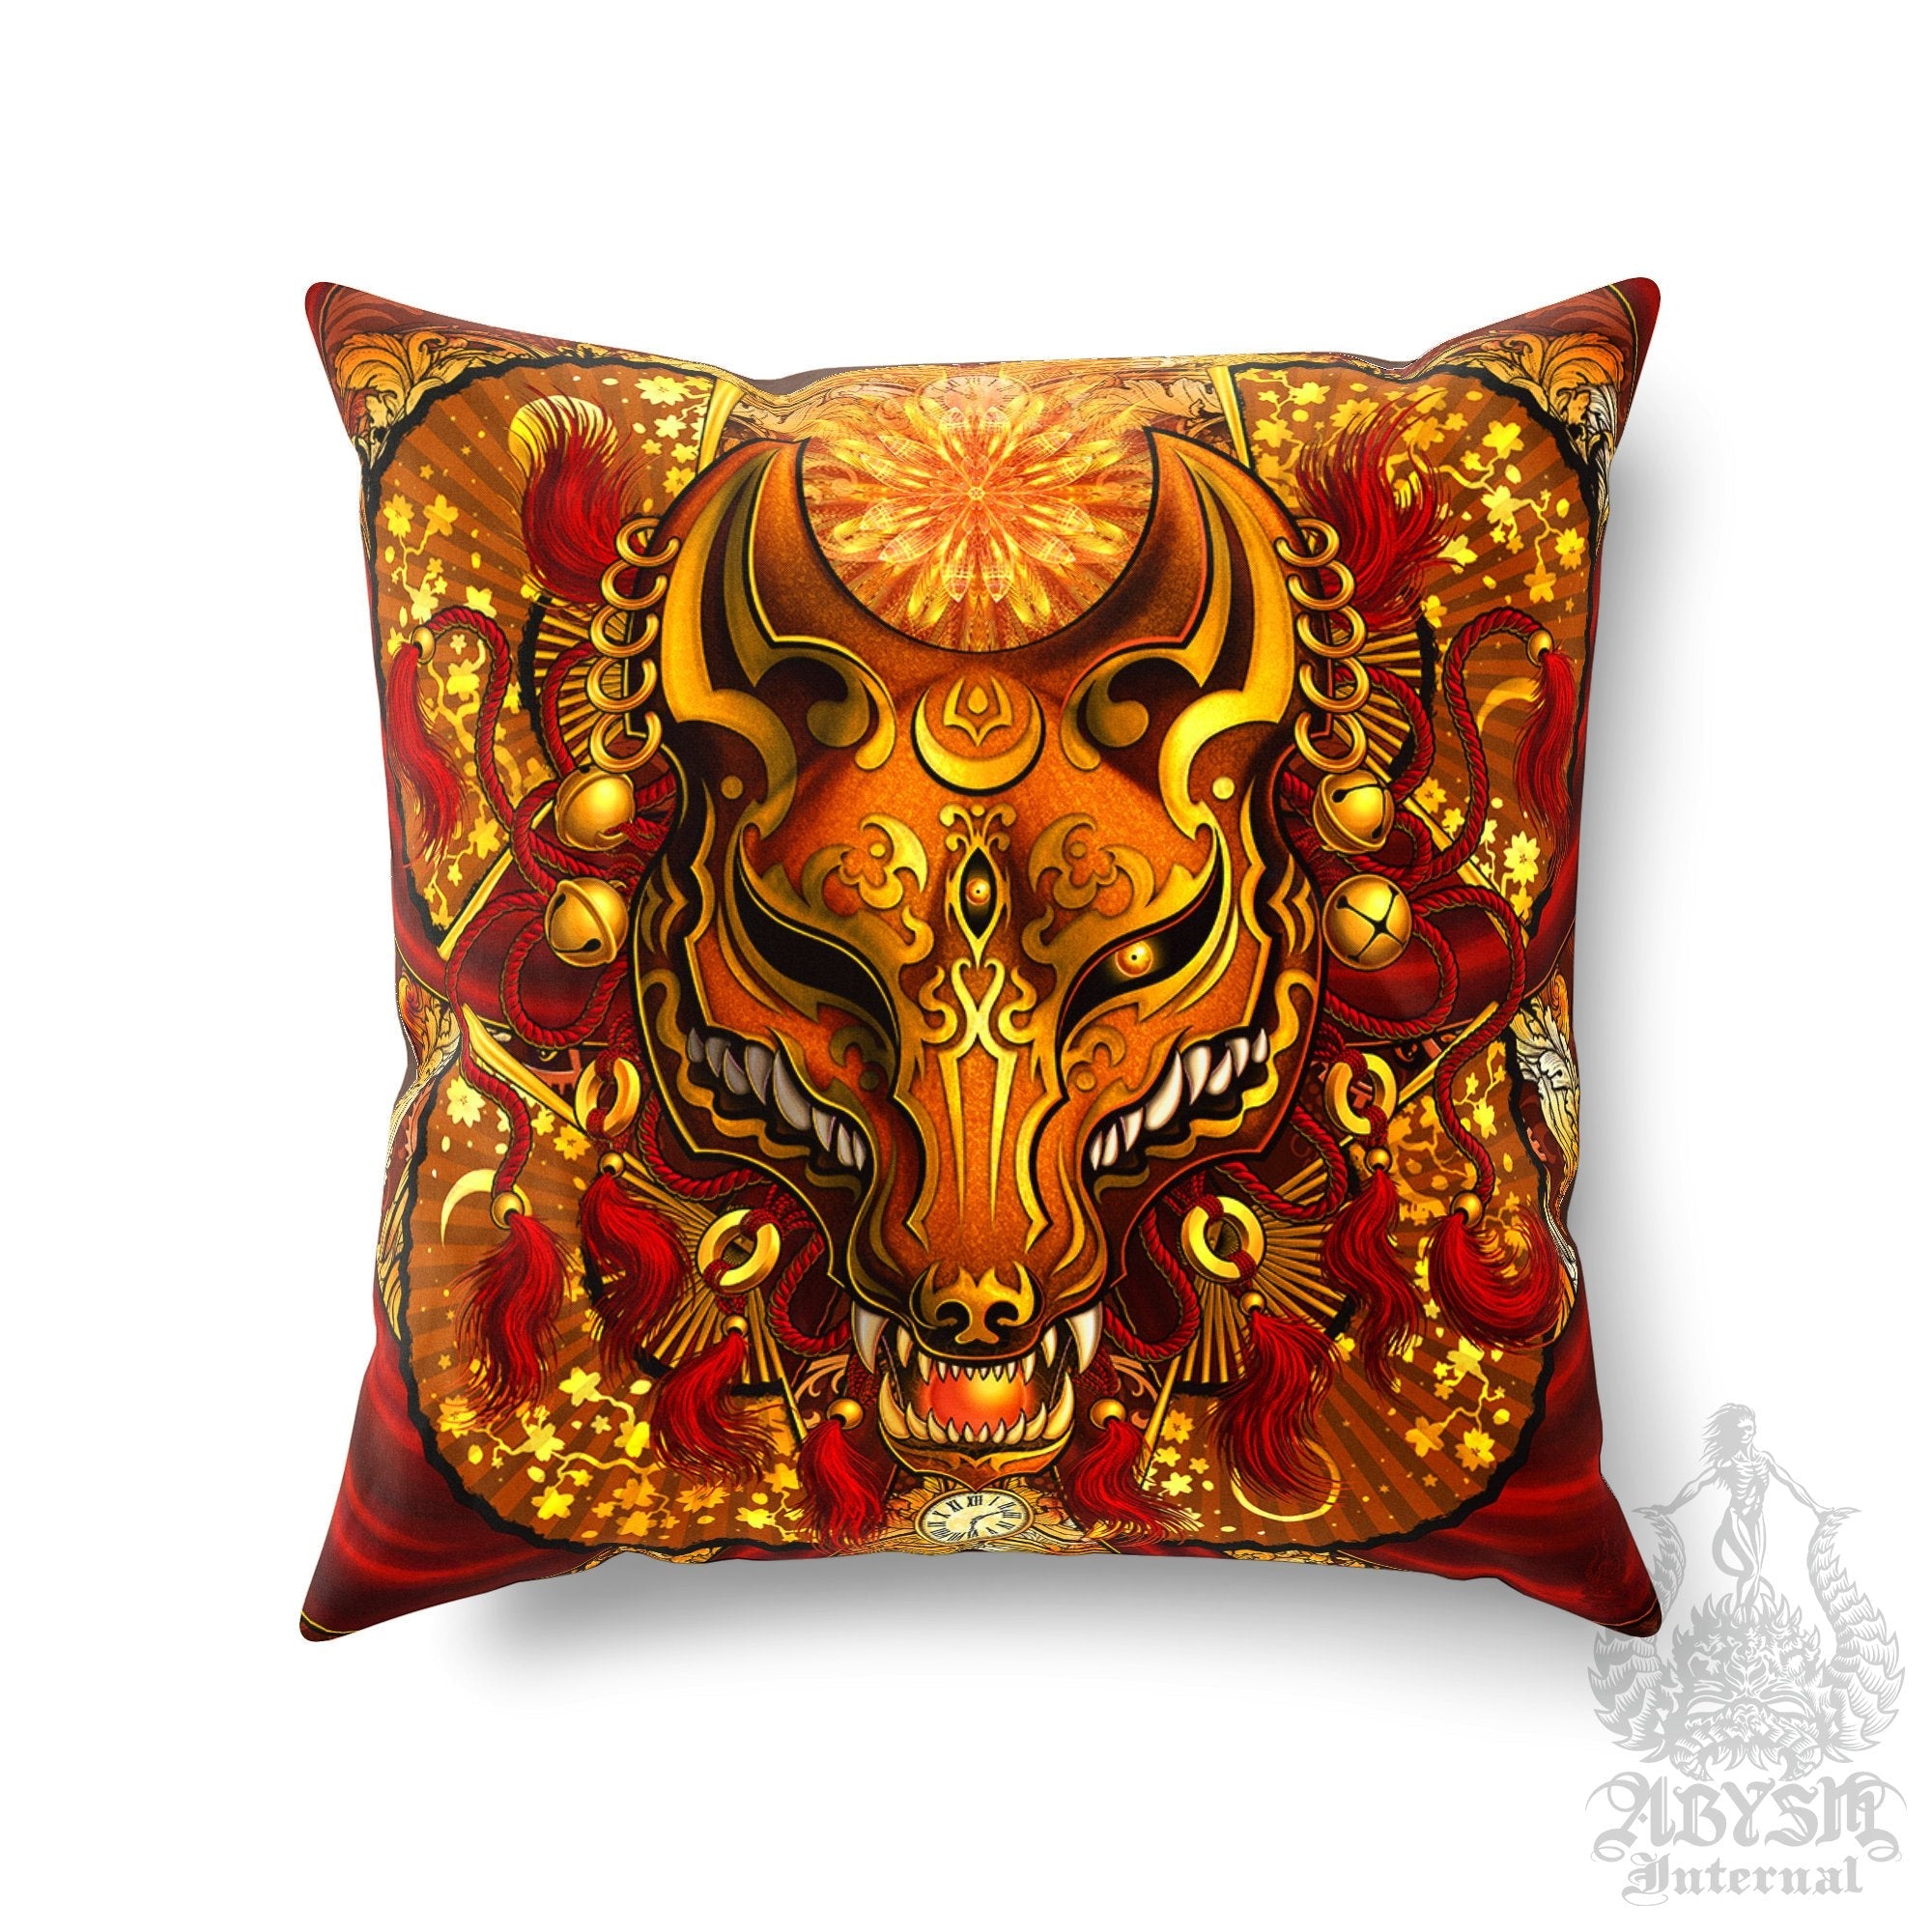 Kitsune Throw Pillow, Decorative Accent Cushion, Japanese Fox Mask, Okami, Anime and Gamer Room Decor - Steampunk, Red - Abysm Internal